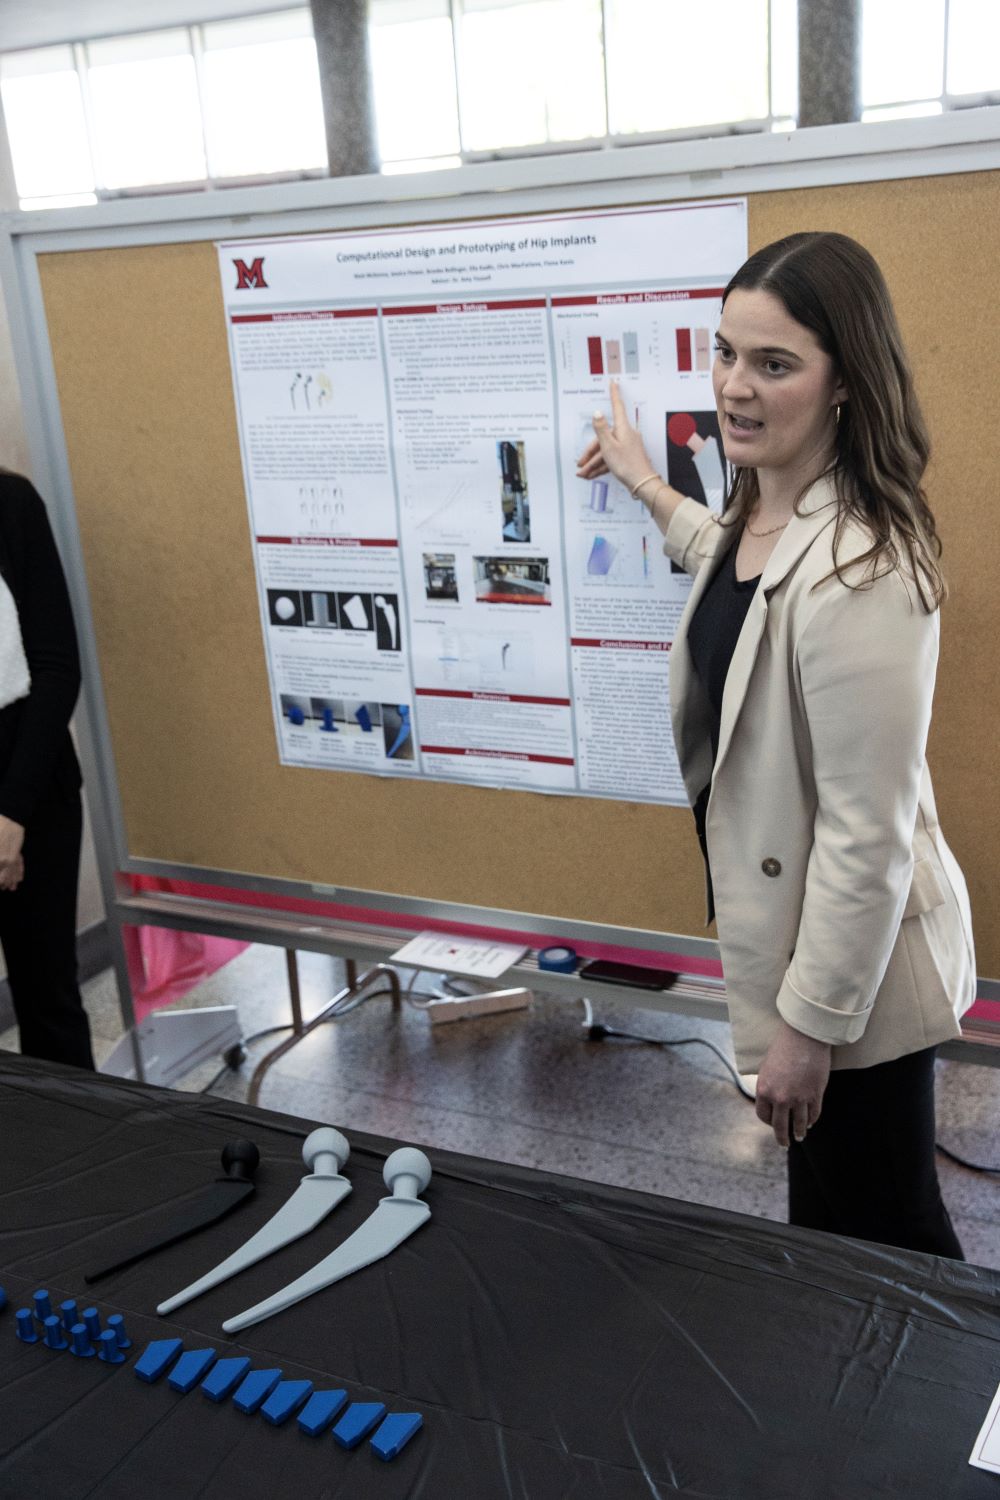 Female presenting at a poster session